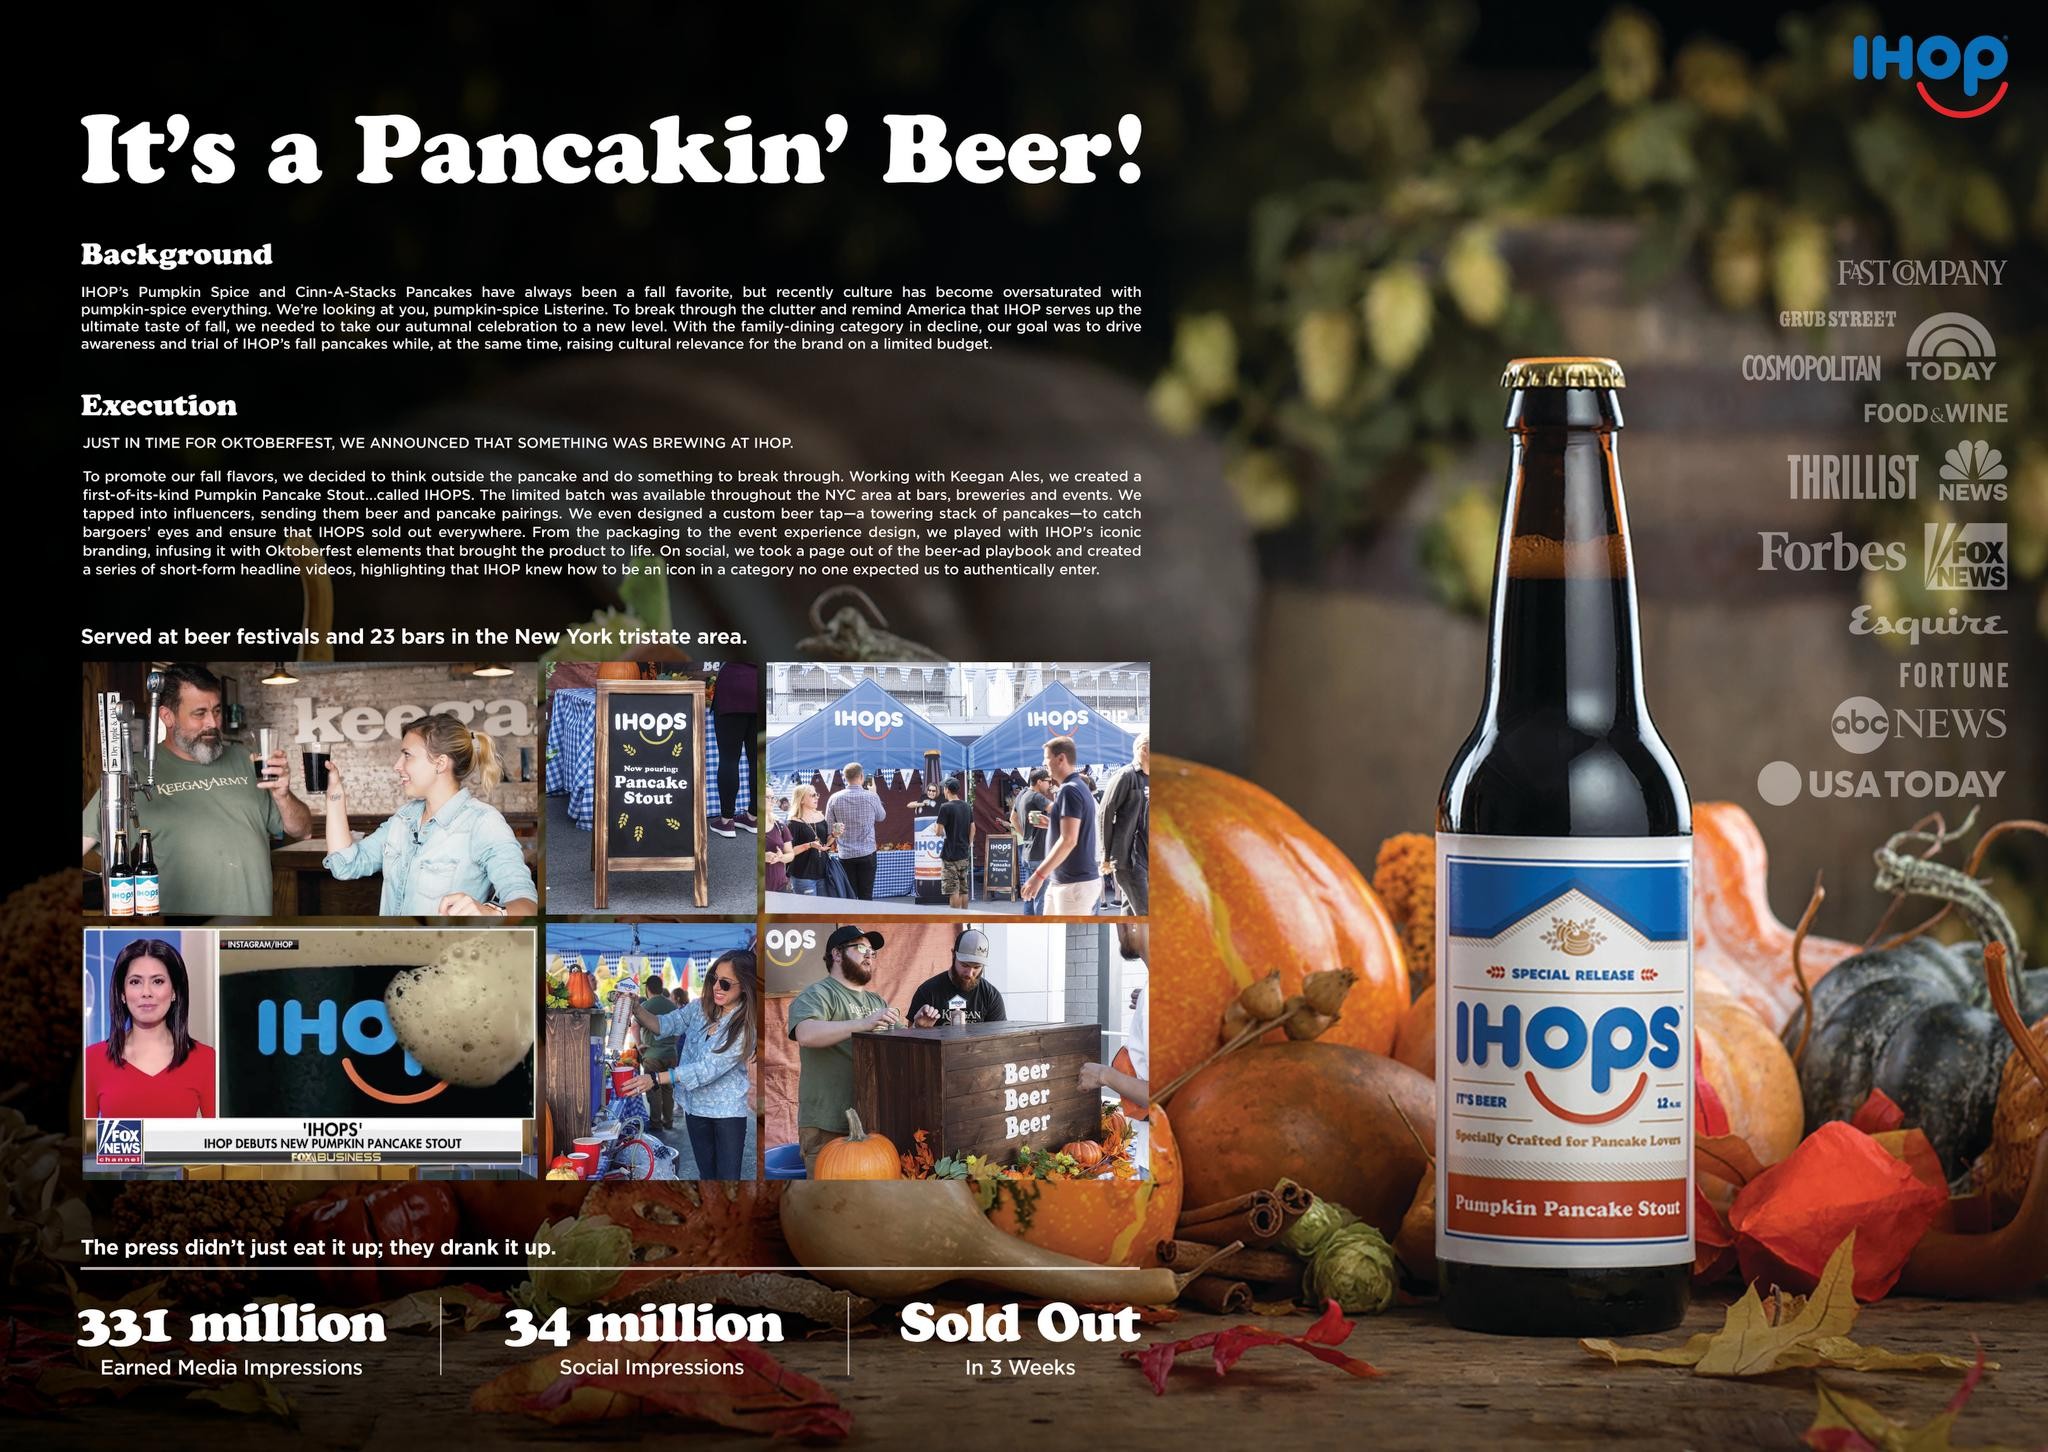 IHOPS: IHOP CELEBRATES FALL FROM PANCAKES TO PINT GLASS